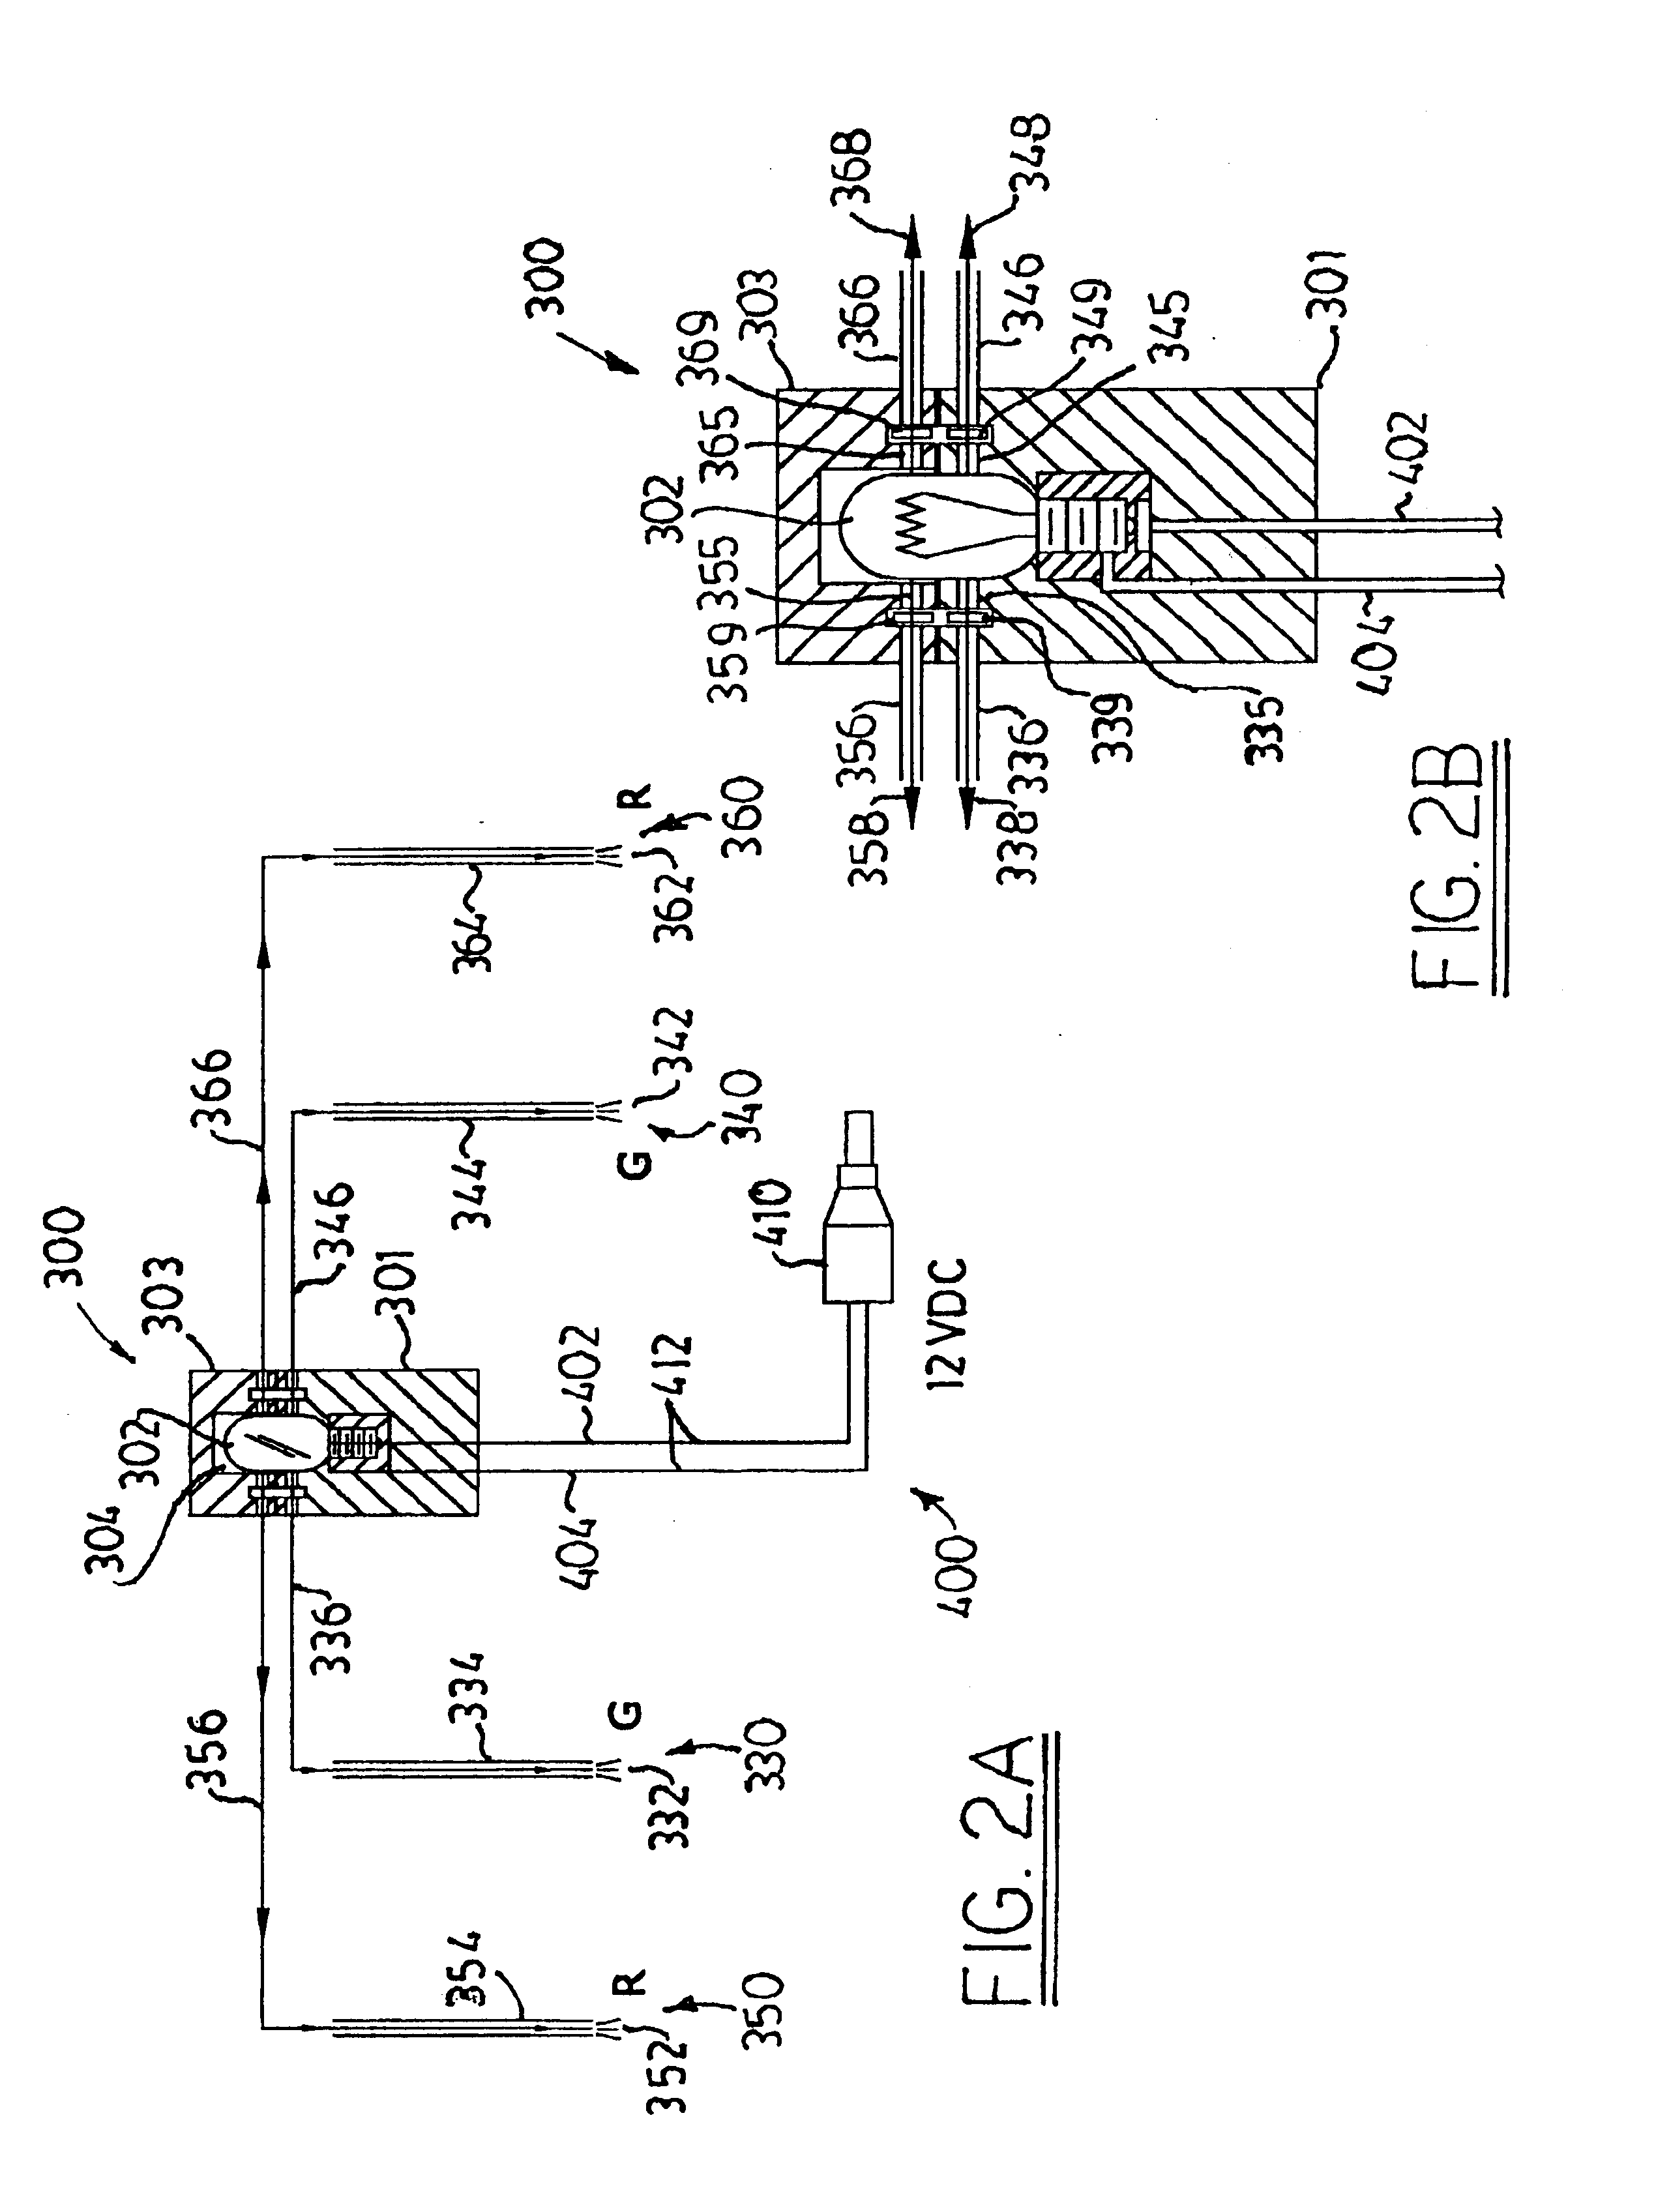 Highway parameter gauge for precise operation of a tractor-trailer